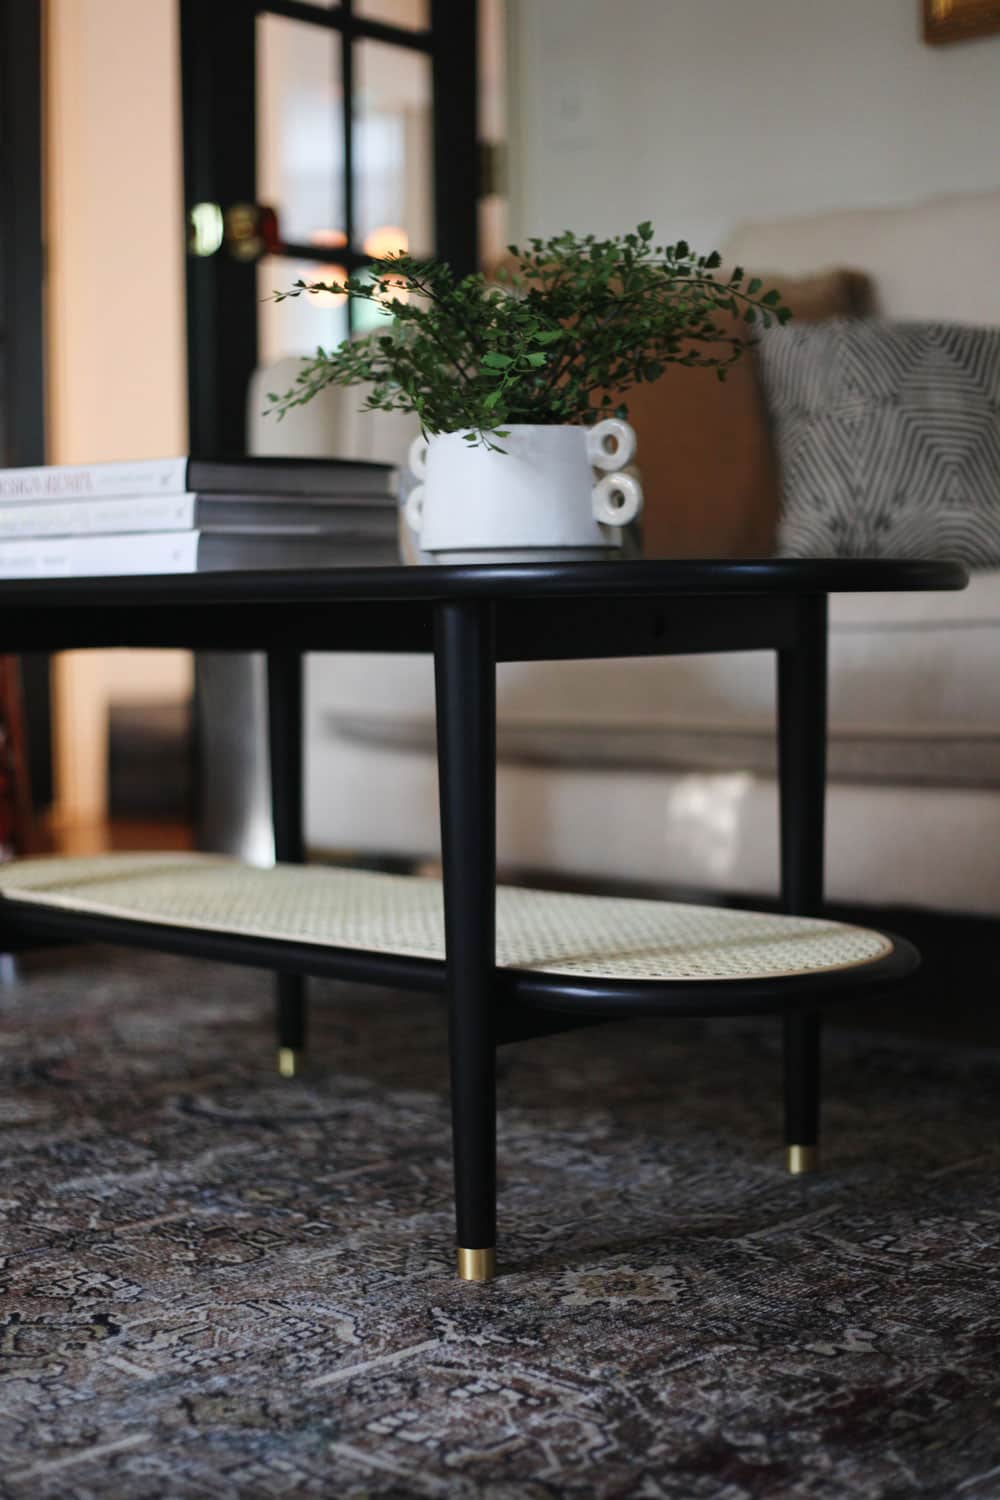 Home decoration ideas on a budget - This cane coffee table is an inexpensive purchase from Amazon